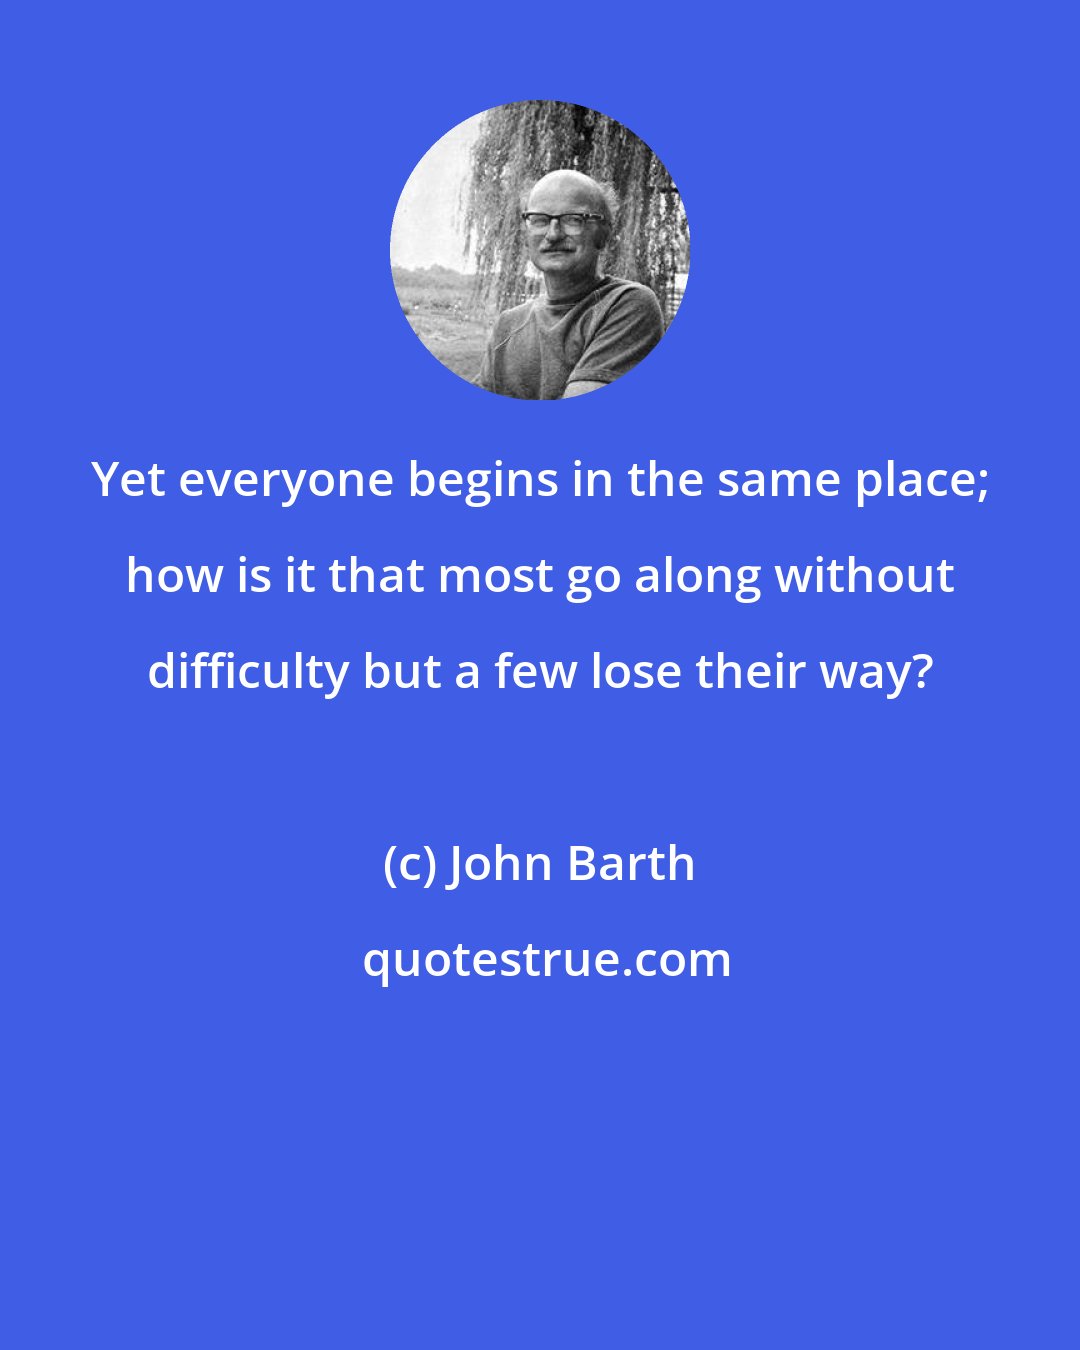 John Barth: Yet everyone begins in the same place; how is it that most go along without difficulty but a few lose their way?